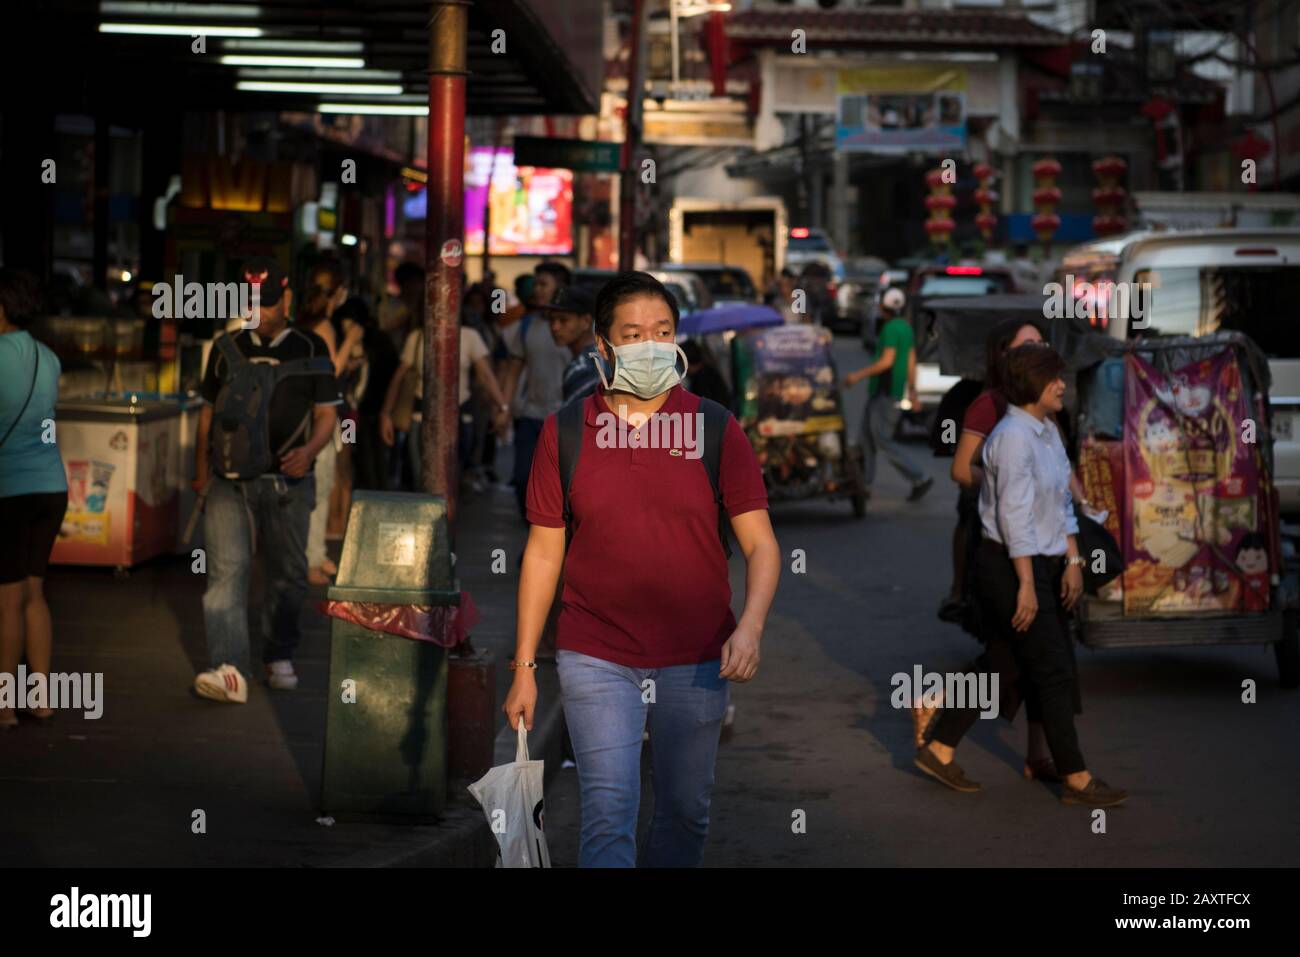 Manila, Philippines. 12th Feb, 2020. A man wears a face mask in Manila's Chinatown district as a precaution to the outbreak of the coronavirus. Filipinos remain anxious over a new coronavirus known as Covid-19 which originated in Wuhan, China in December 2019. The Philippines' Department of Health announced the country's first death due to the virus on 2 February - the first reported death outside of China. The number of 2019-nCoV cases worldwide has already surpassed that of the 2003 Sars epidemic, with the death toll now over 1300. Credit: SOPA Images Limited/Alamy Live News Stock Photo